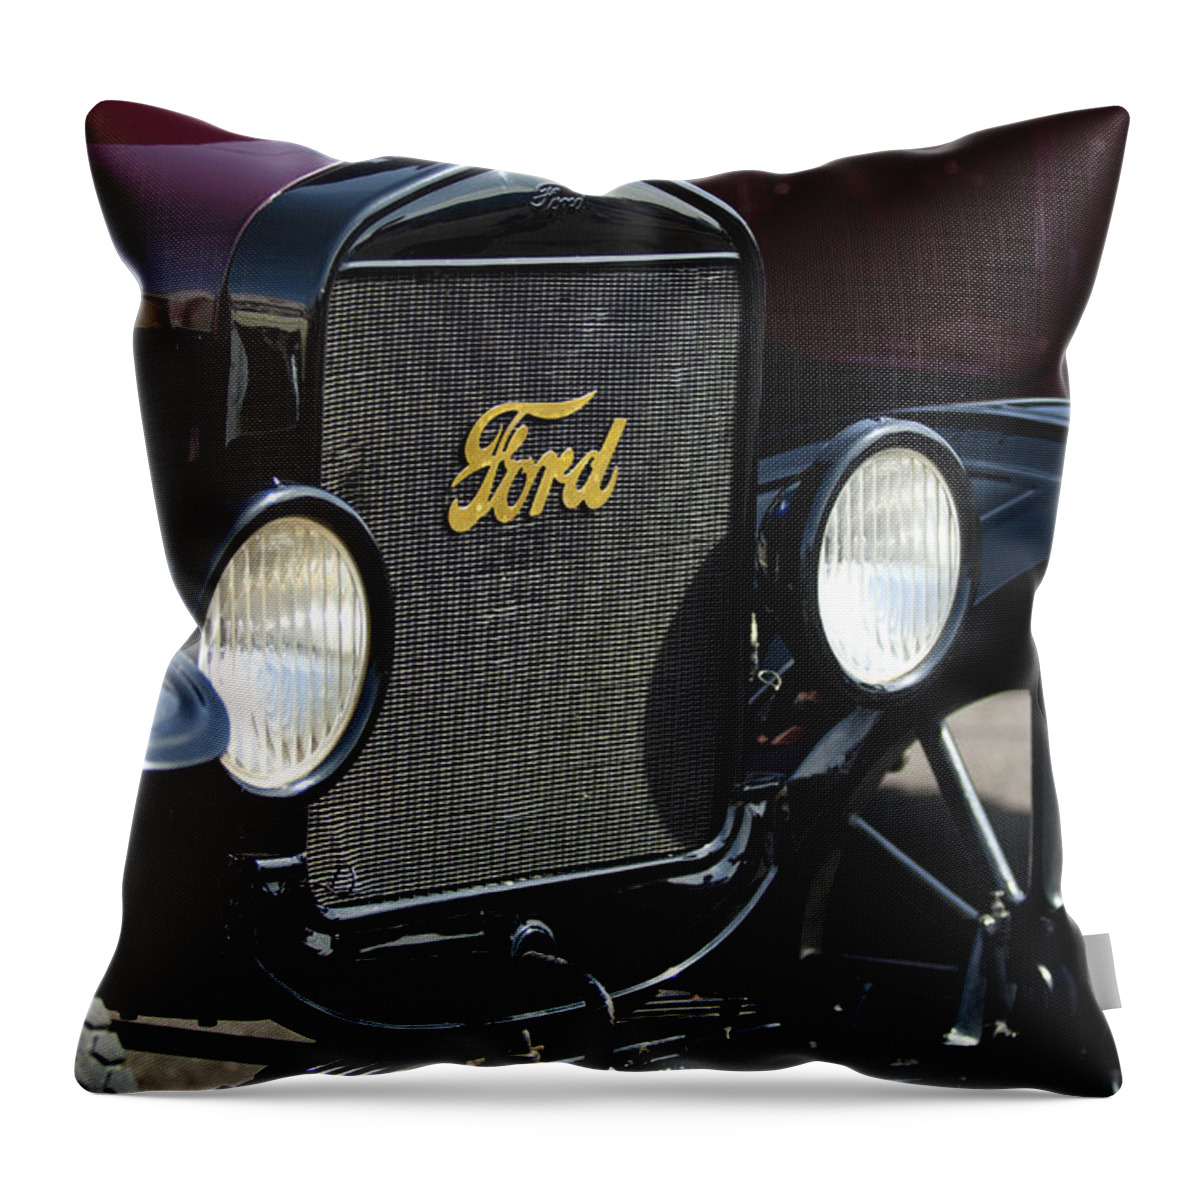 1925 Ford Model T Coupe Throw Pillow featuring the photograph 1925 Ford Model T Coupe Grille by Jill Reger